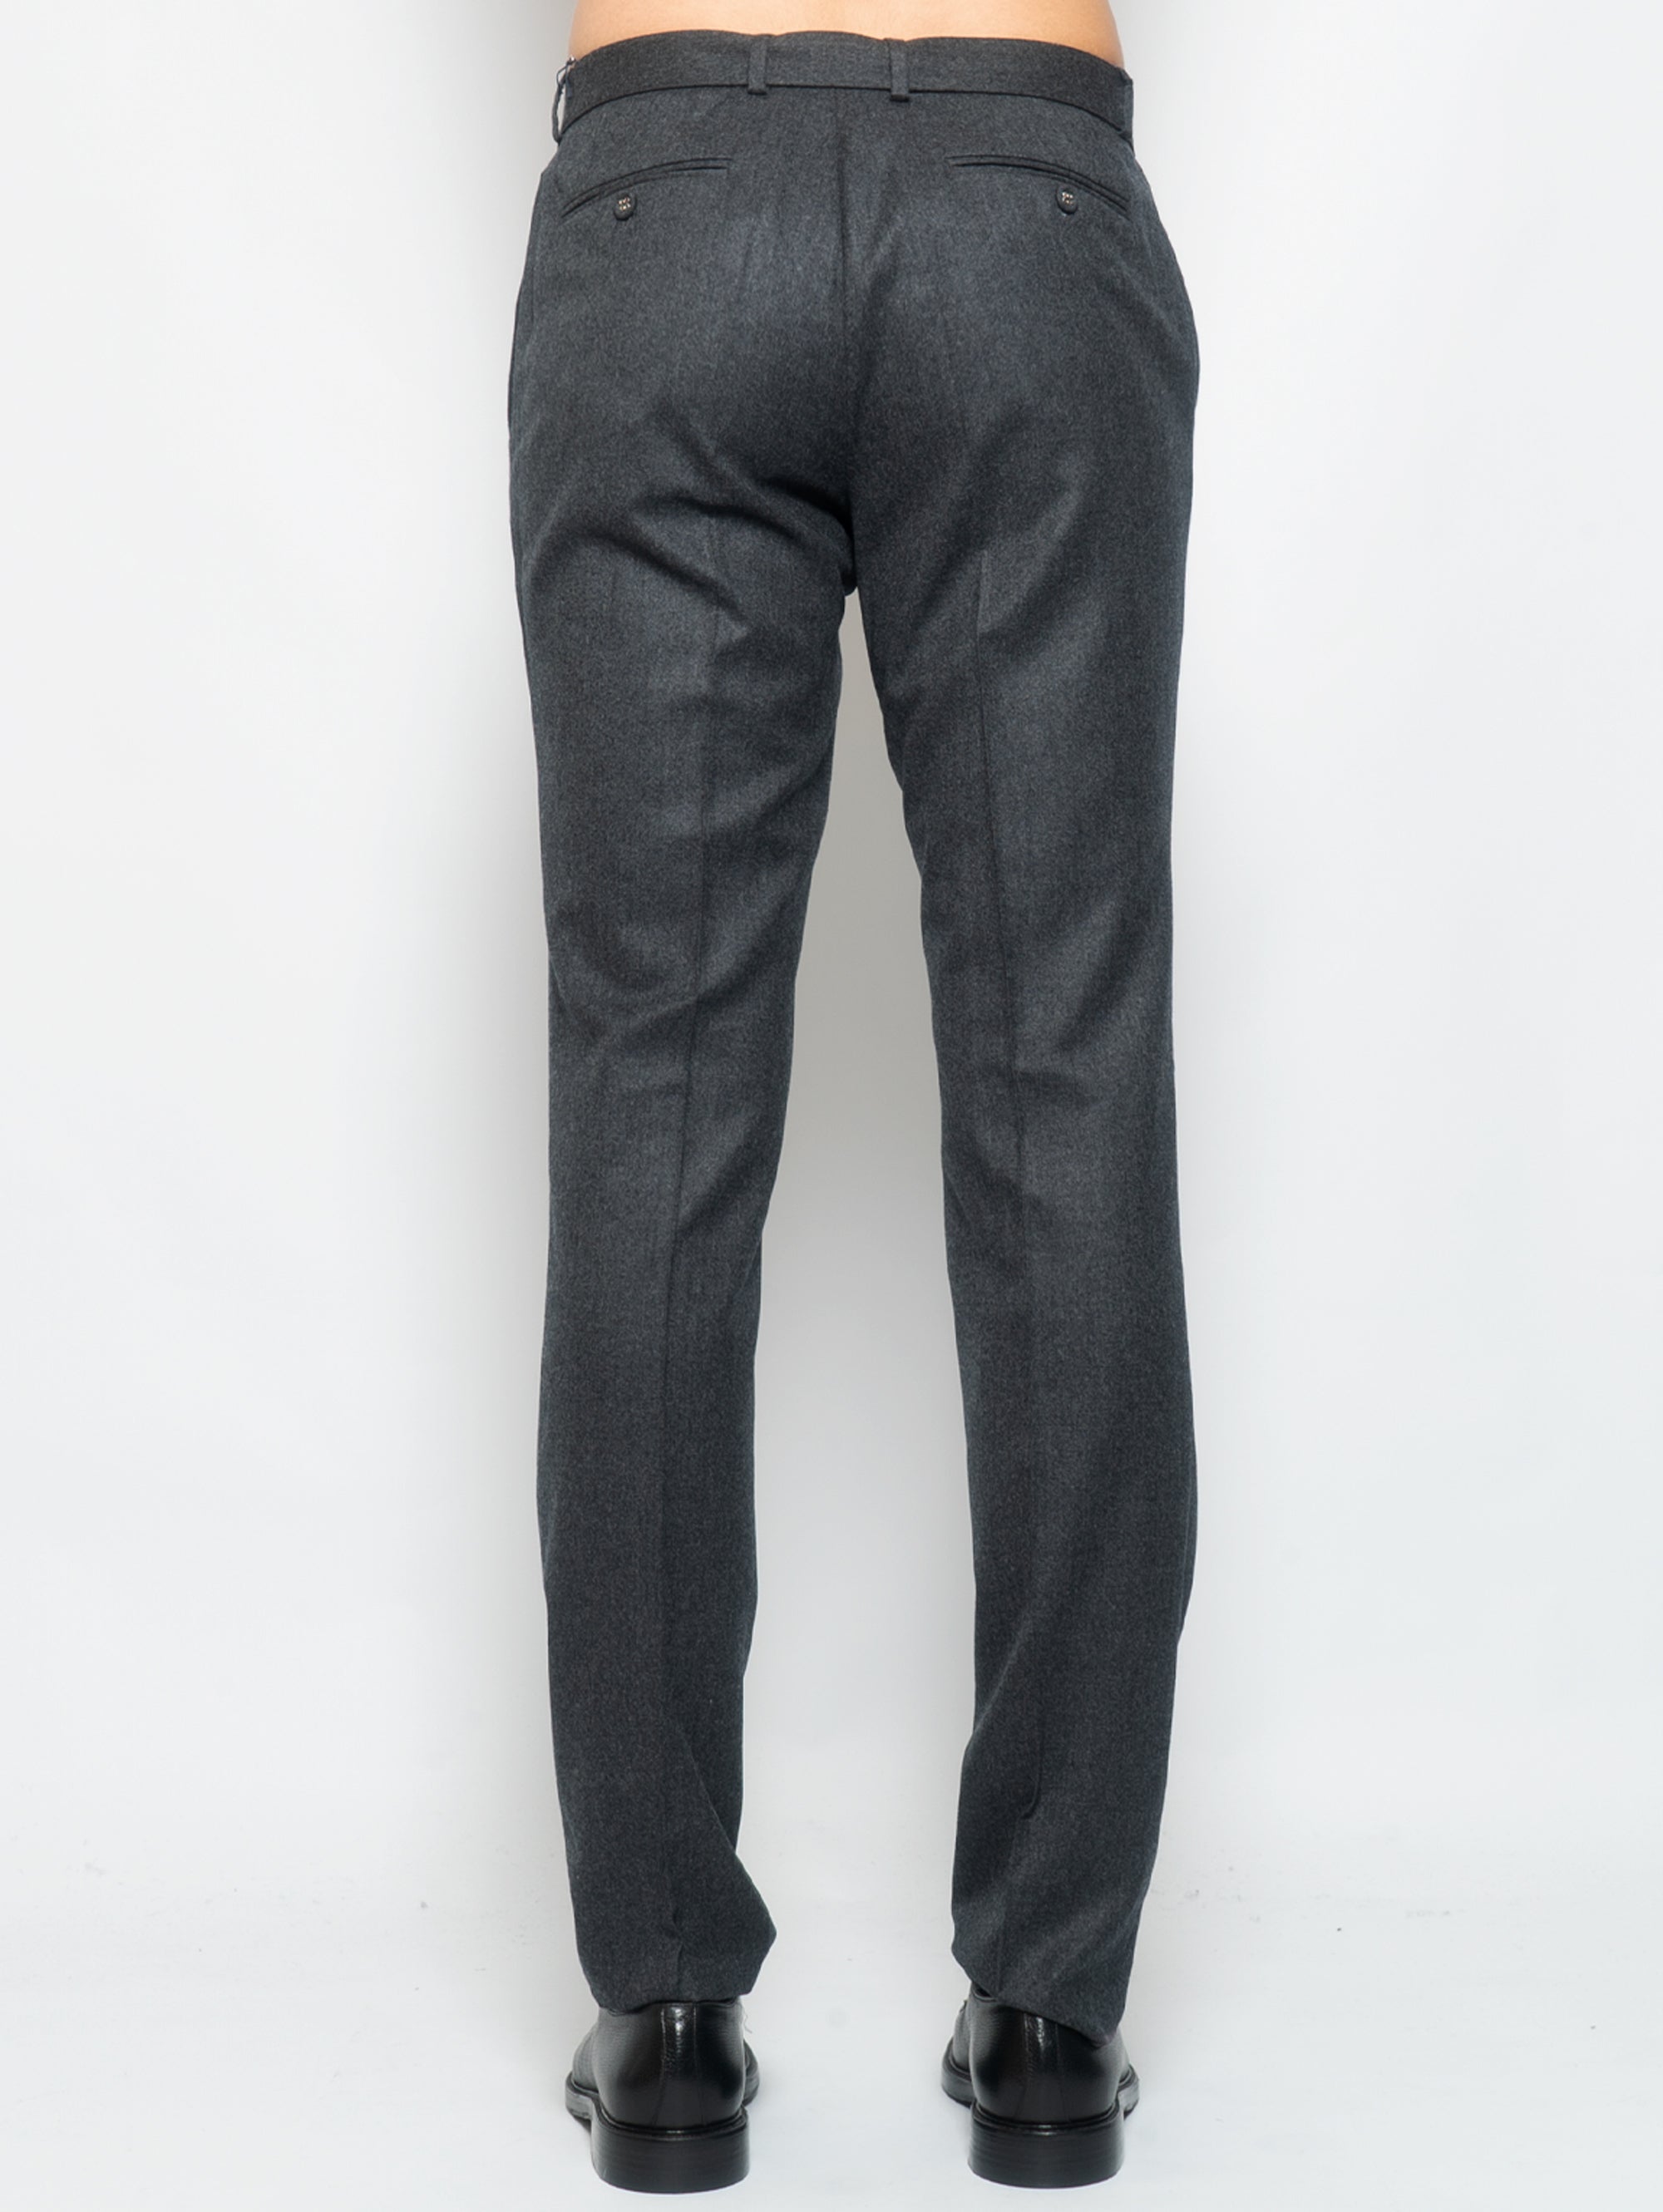 Paul Wool Trousers with Gray Belt